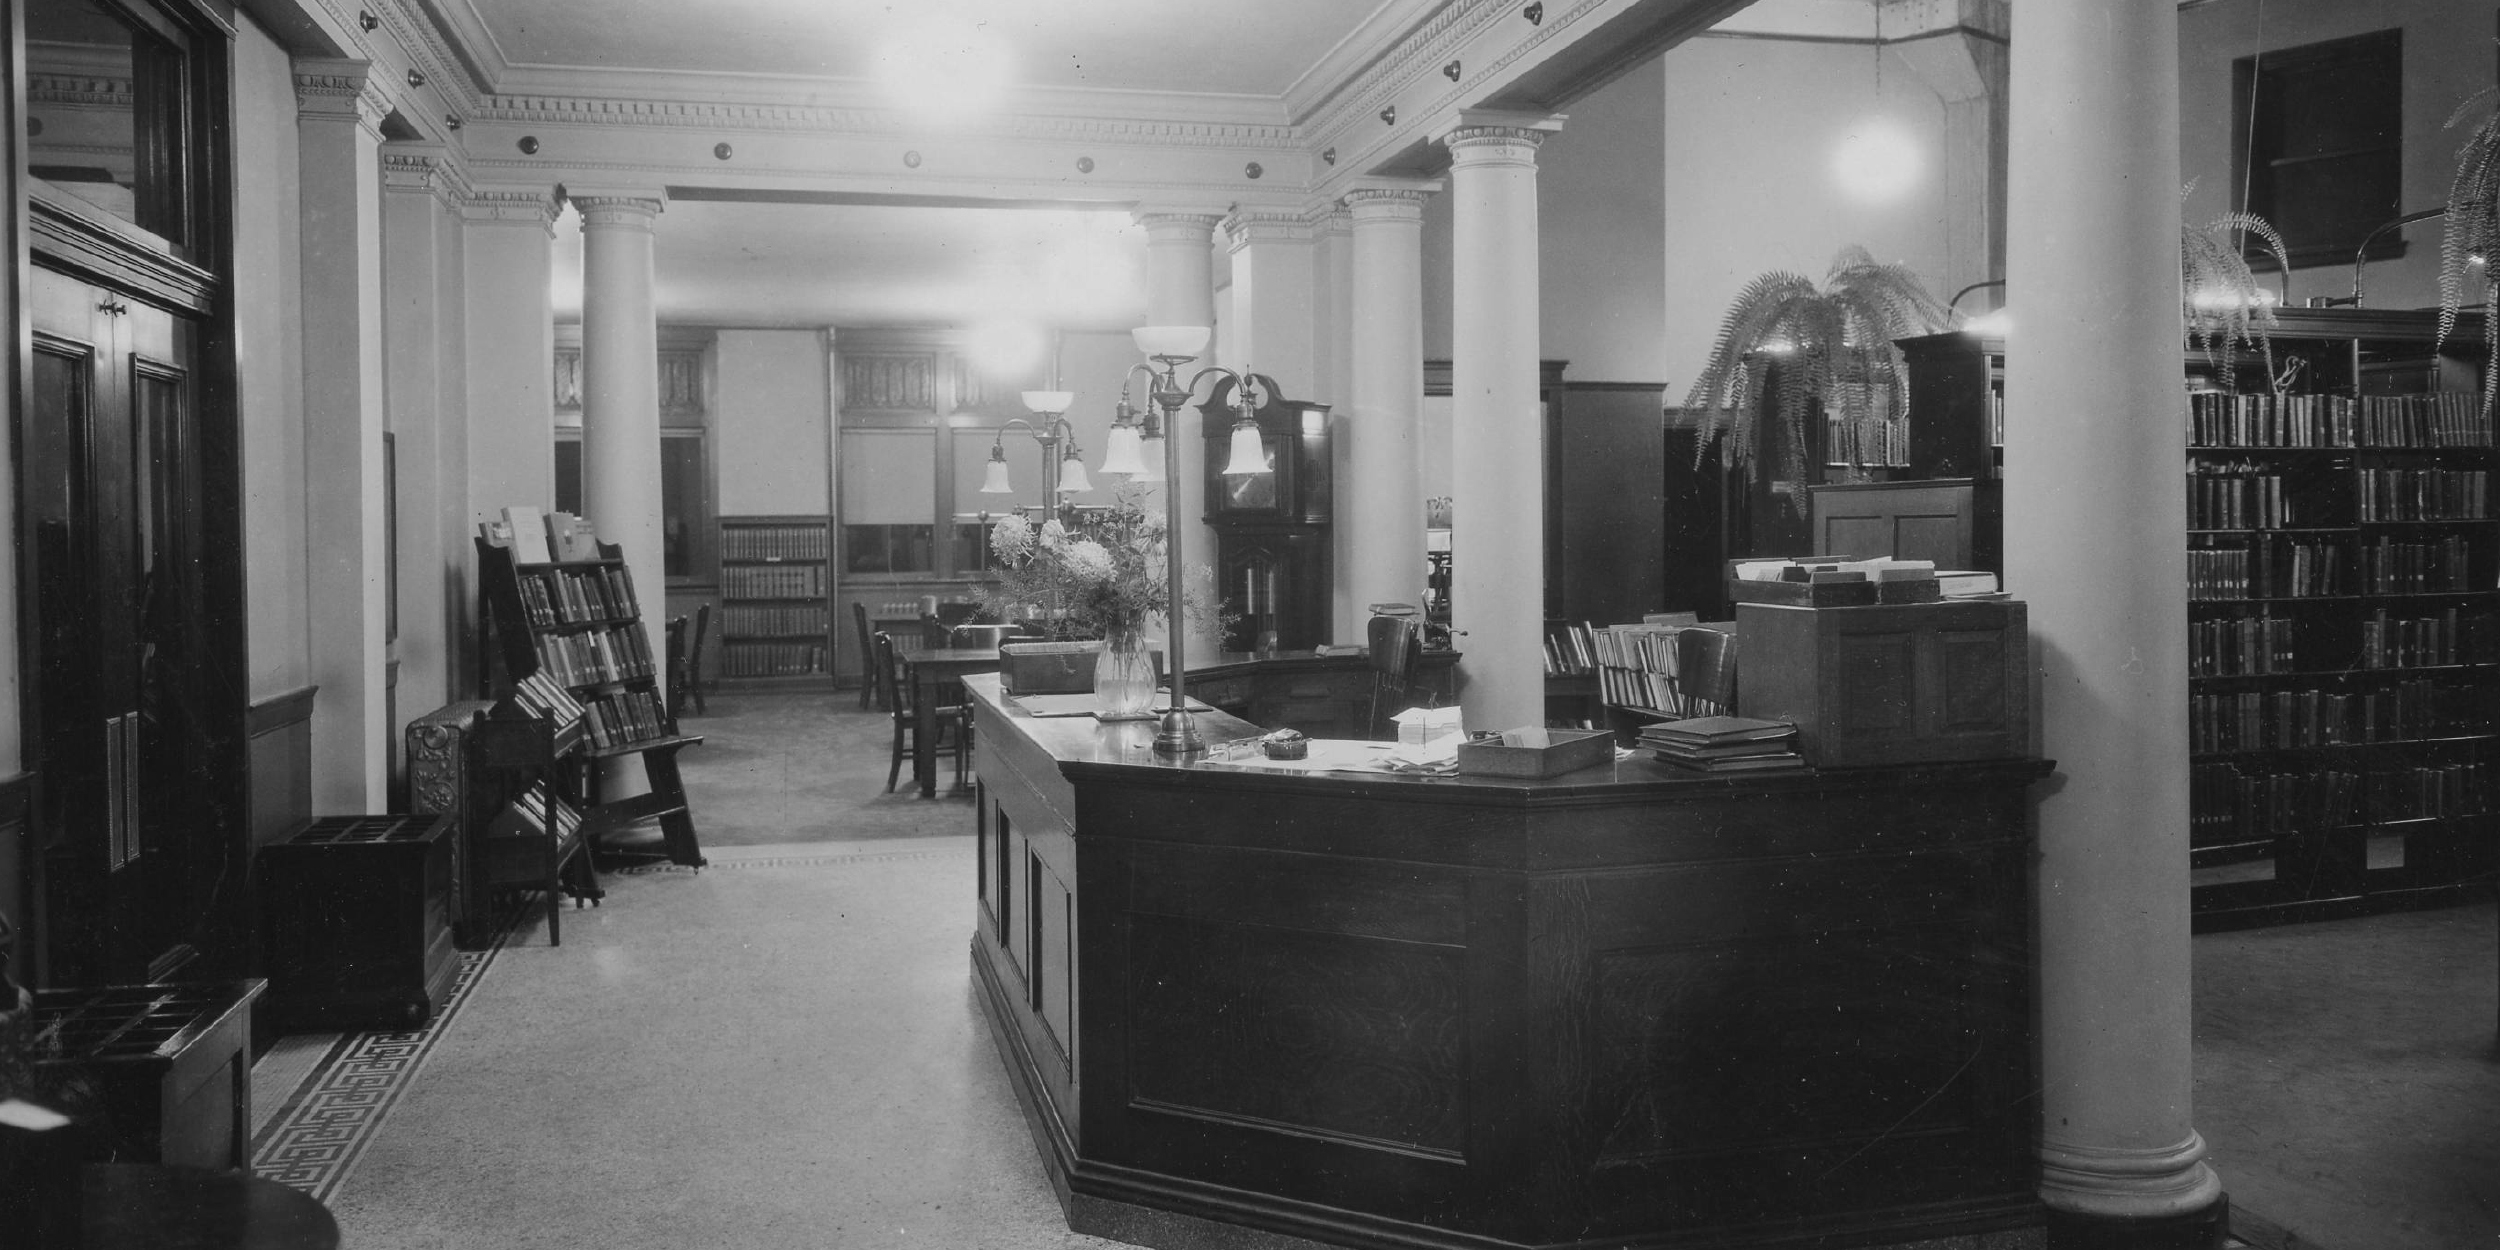 A photo of a service desk at the Carnegie building in 1903.